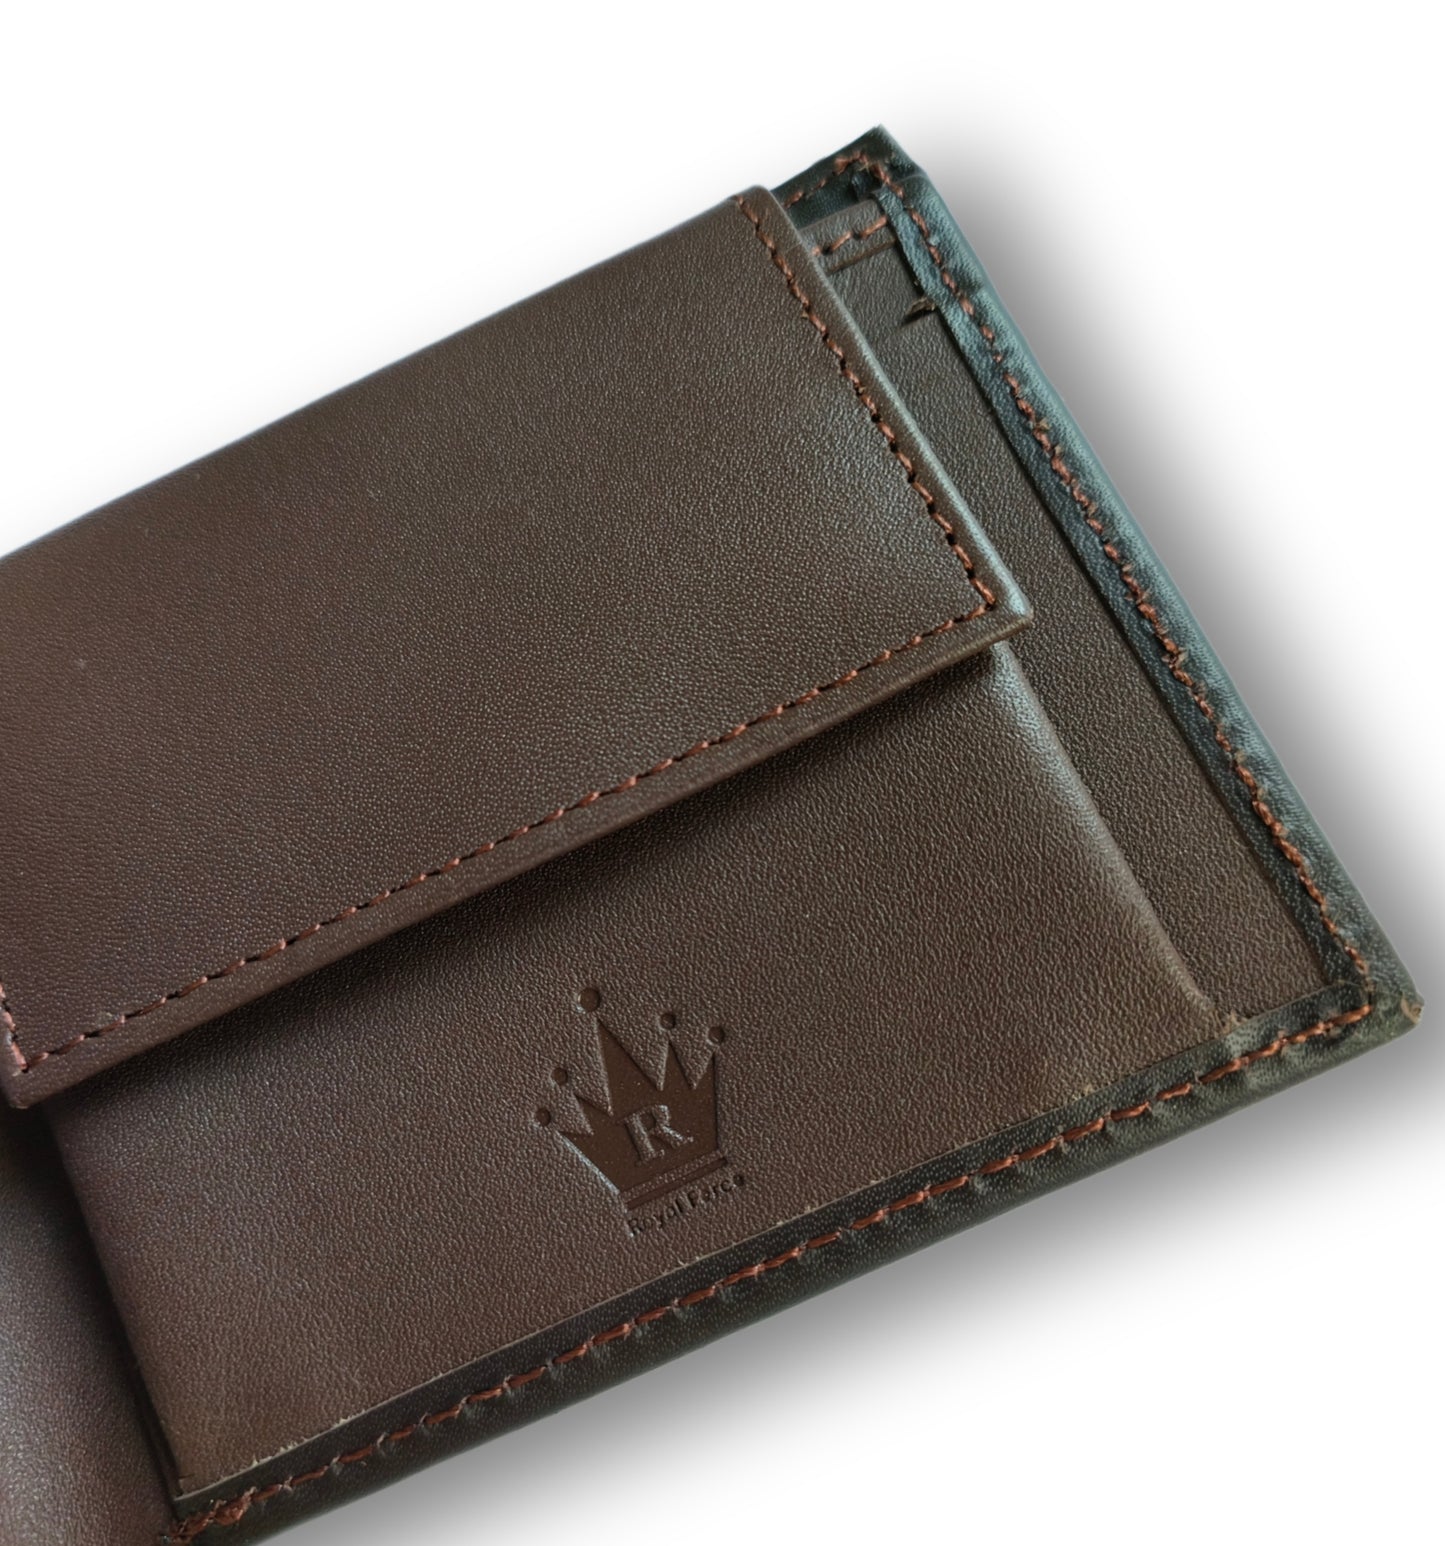 Royal Force Genuine Leather Wallet Xenzia Brown Limited Edition